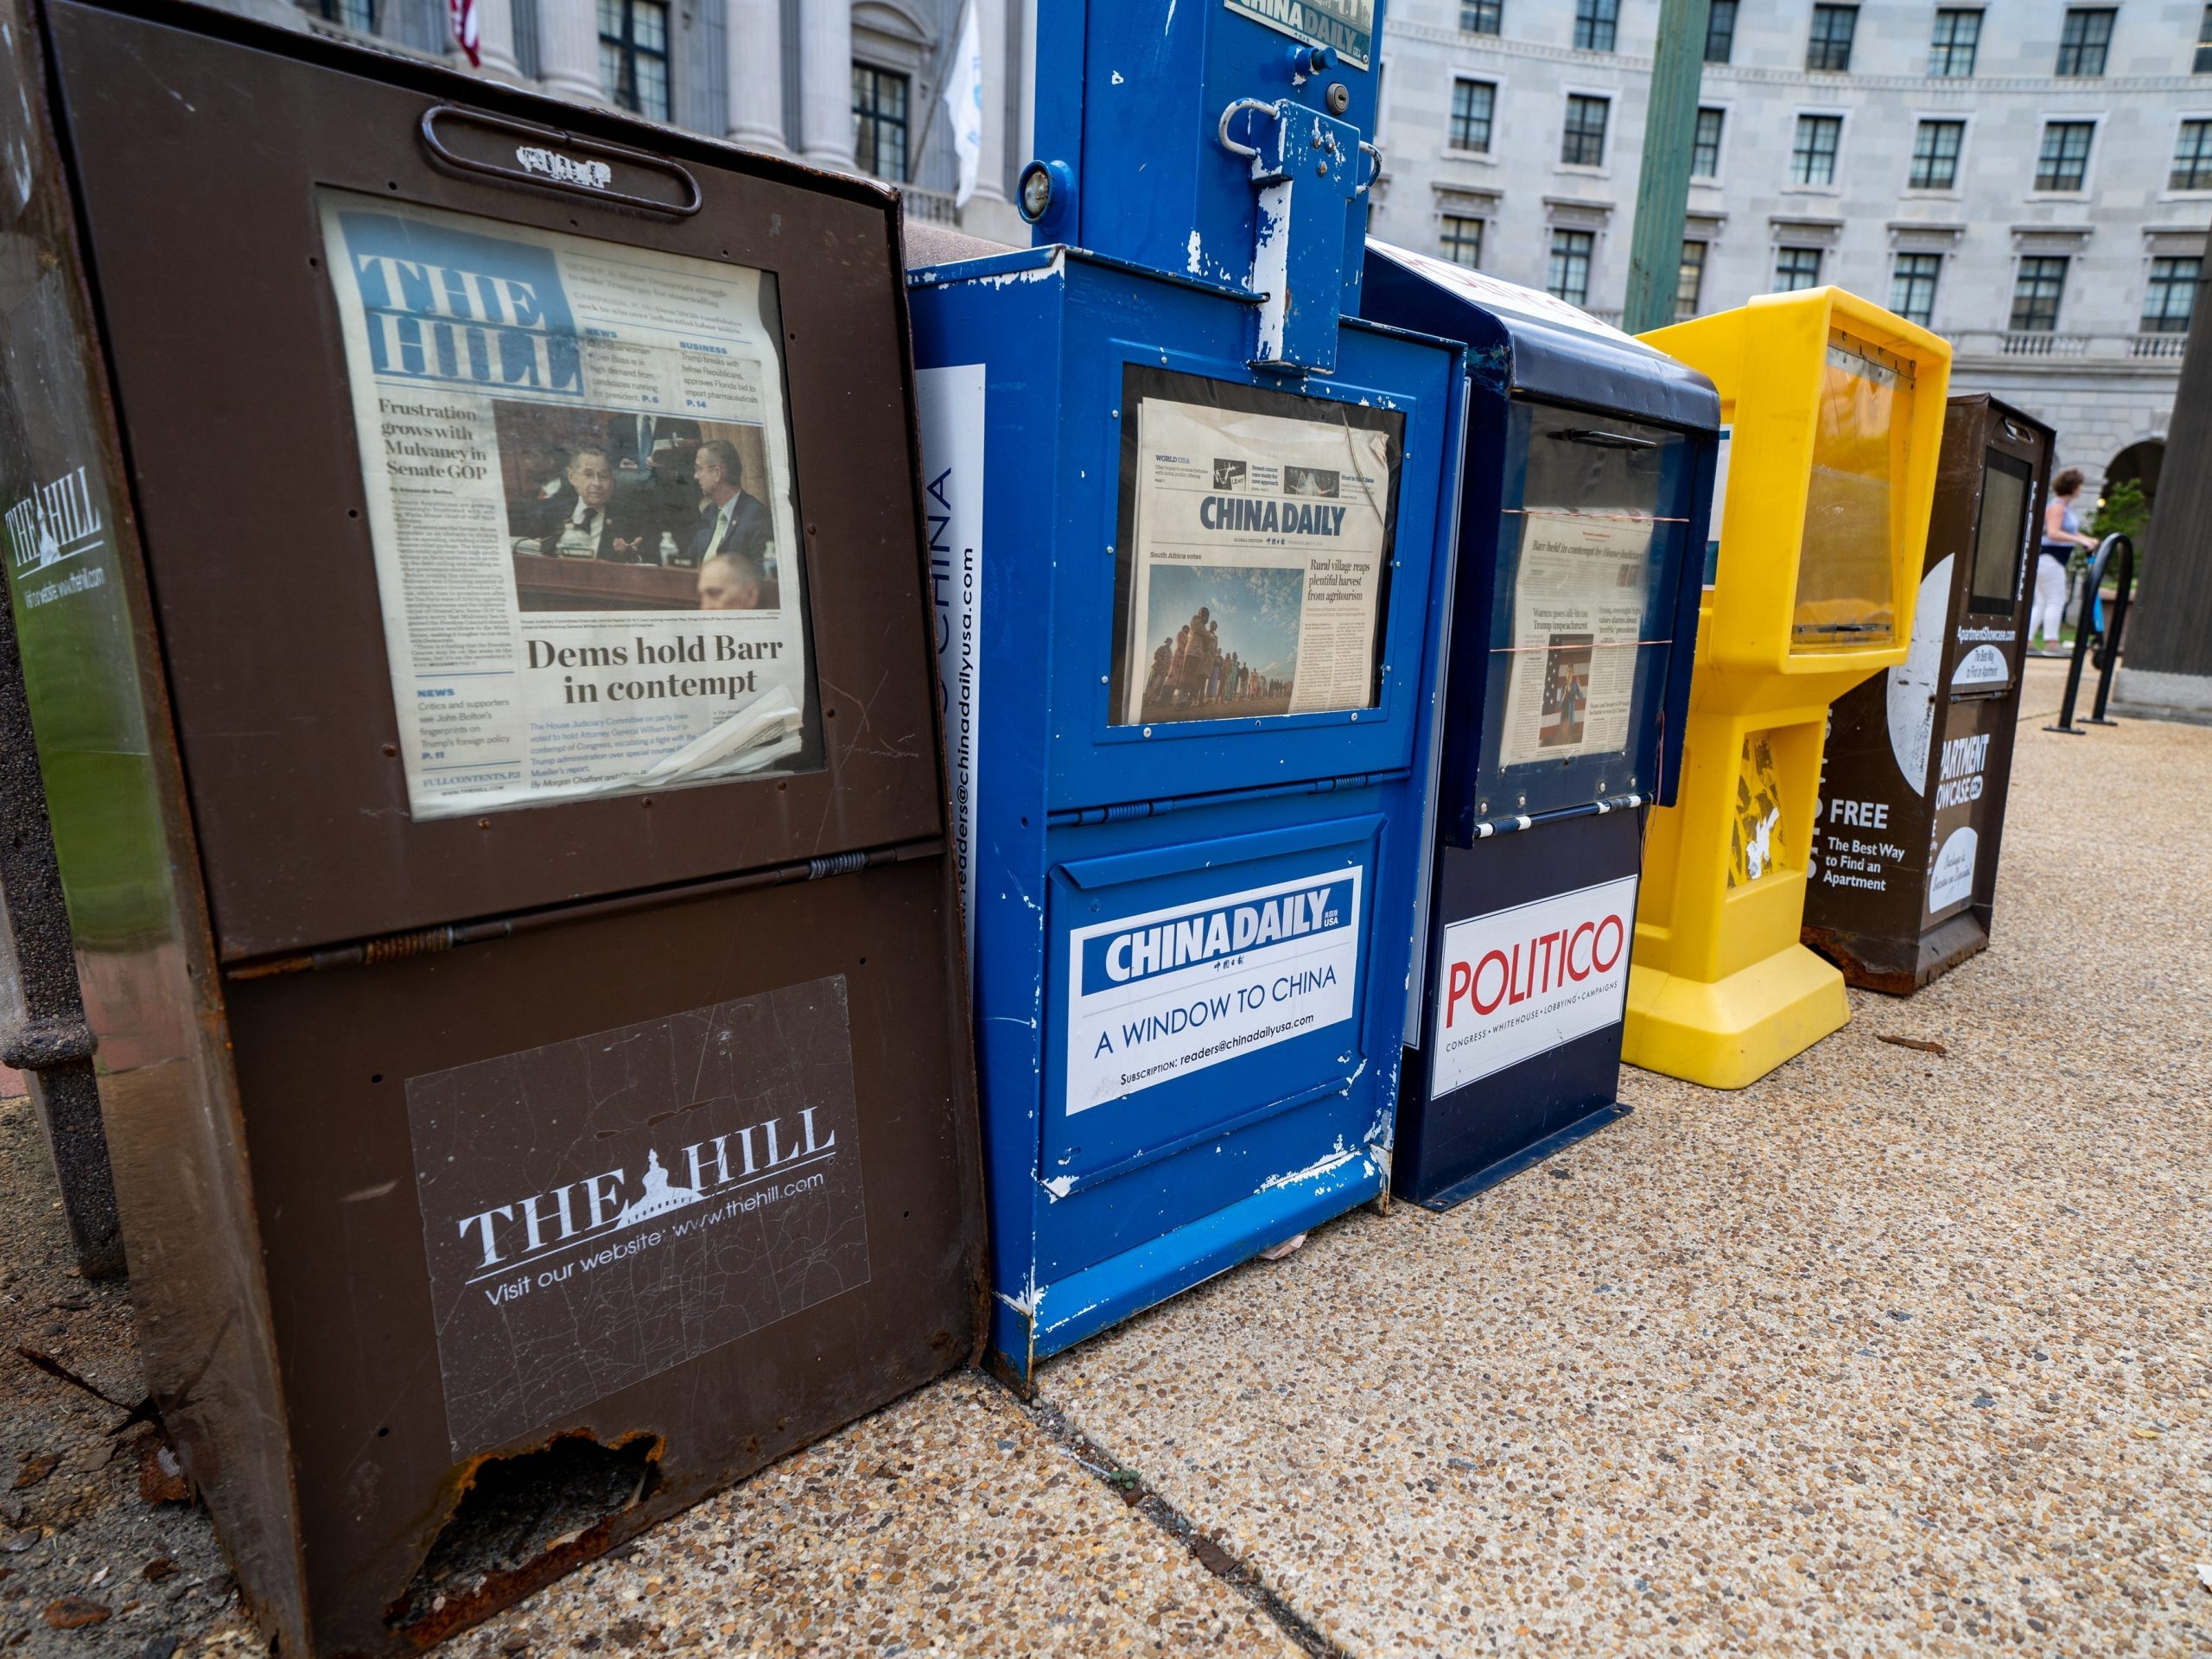 The Hill newspaper and other publications